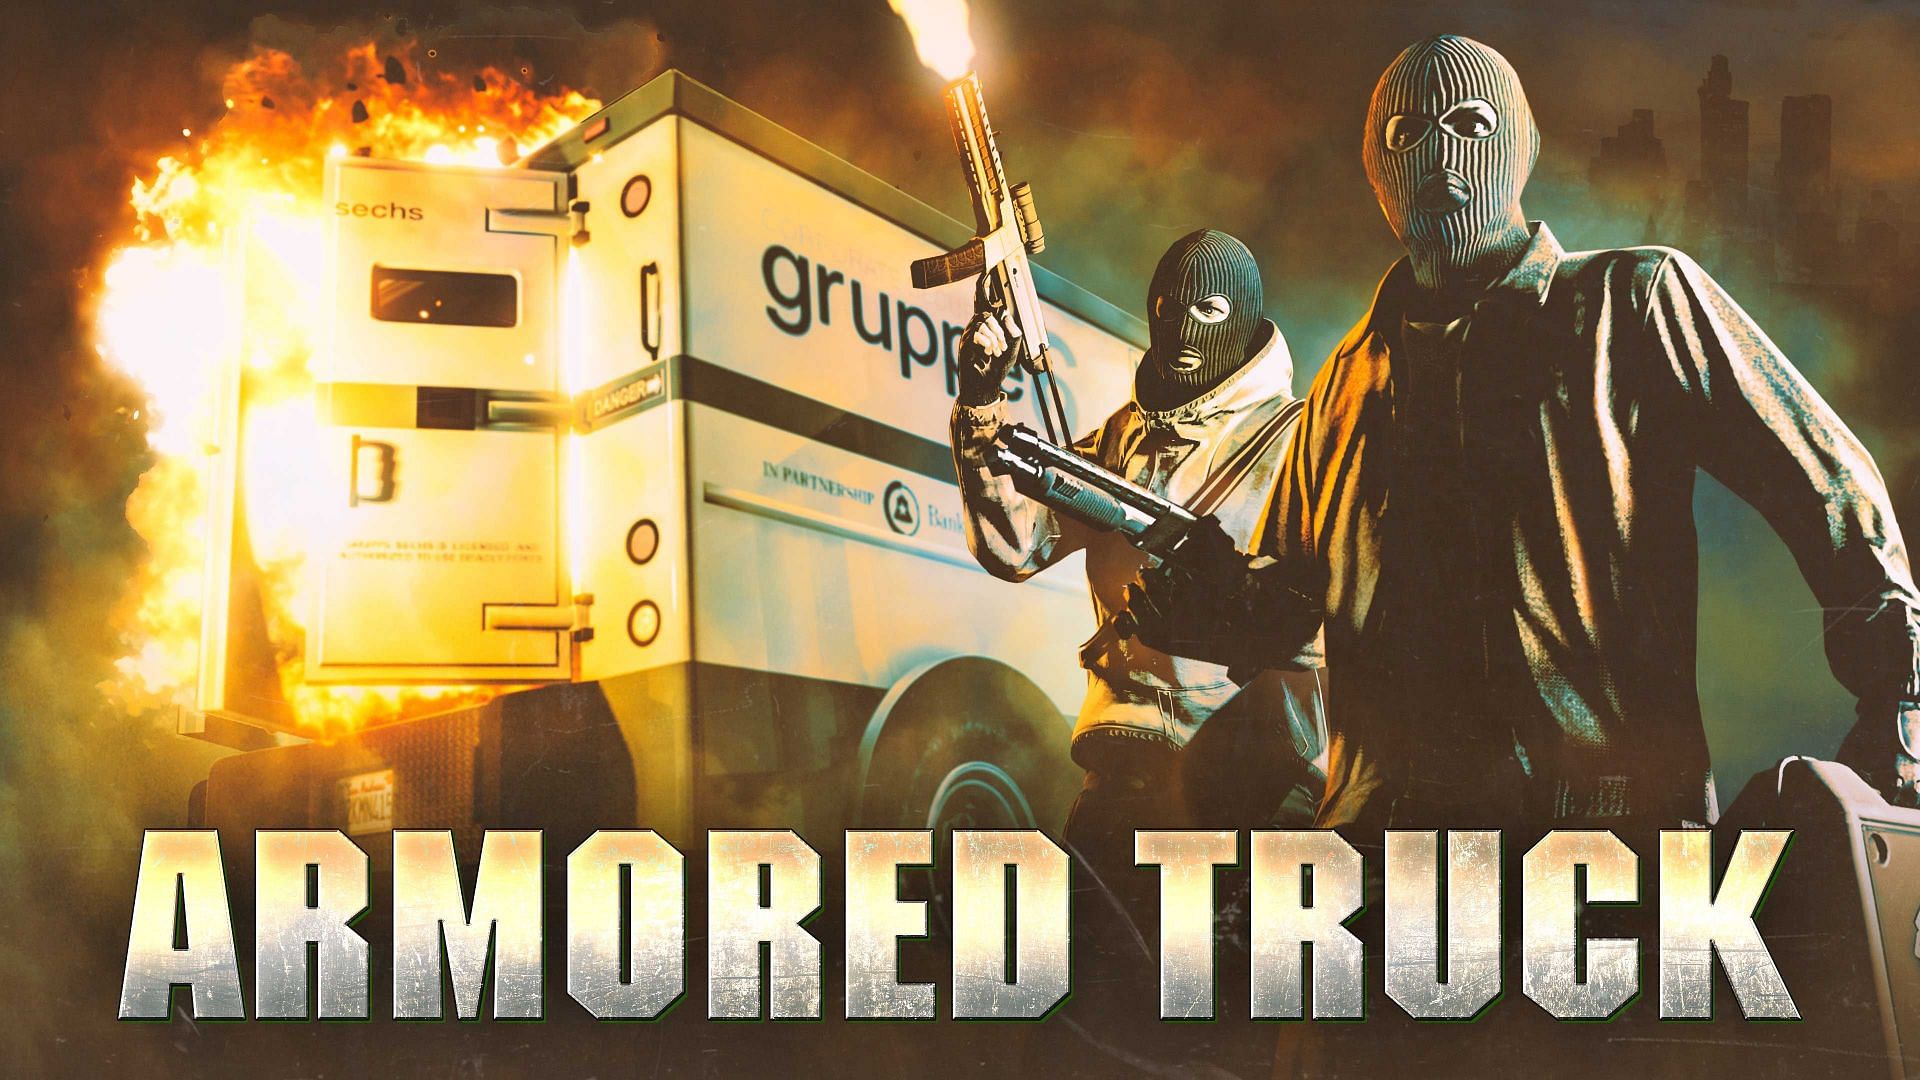 Armored Trucks are one of the activities to discuss below